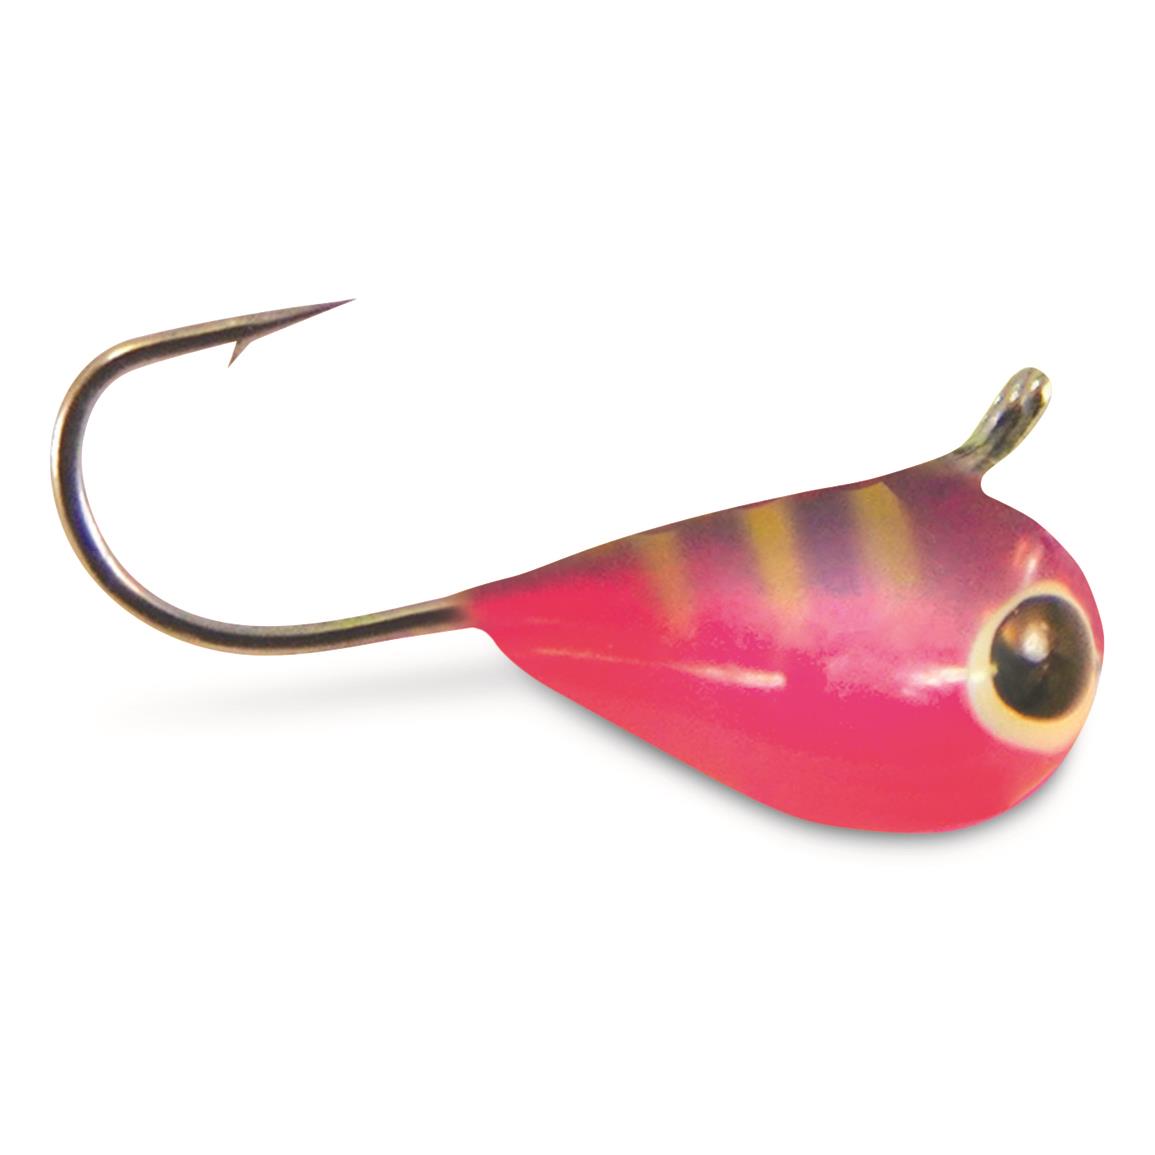 Northland Tungsten Flat Fry Jig - 737312, Ice Tackle at Sportsman's Guide